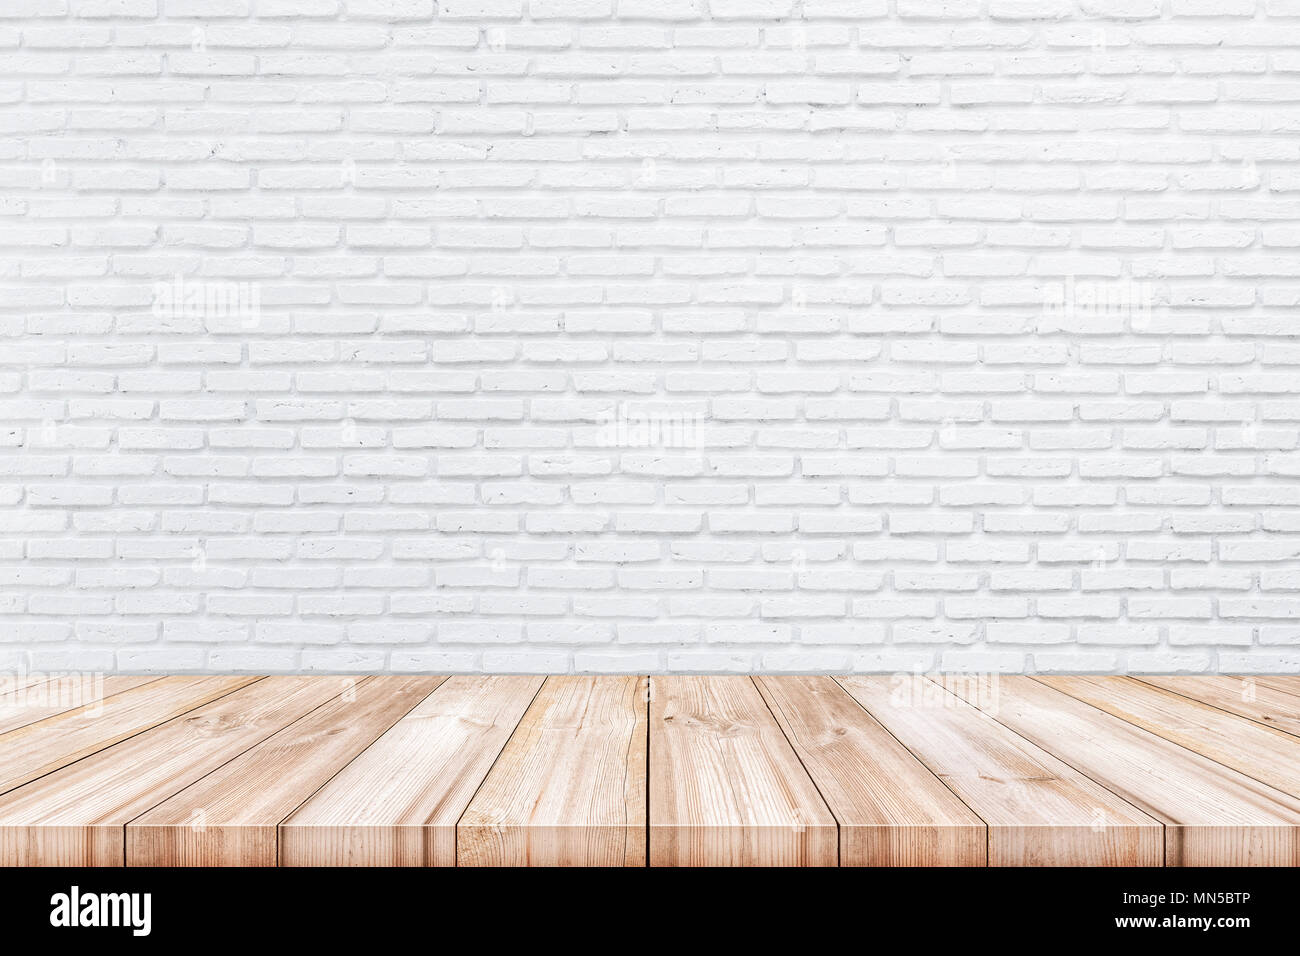 Empty Wooden Table Top With White Brick Wall Background Can Be Used Product Display Stock Photo Alamy